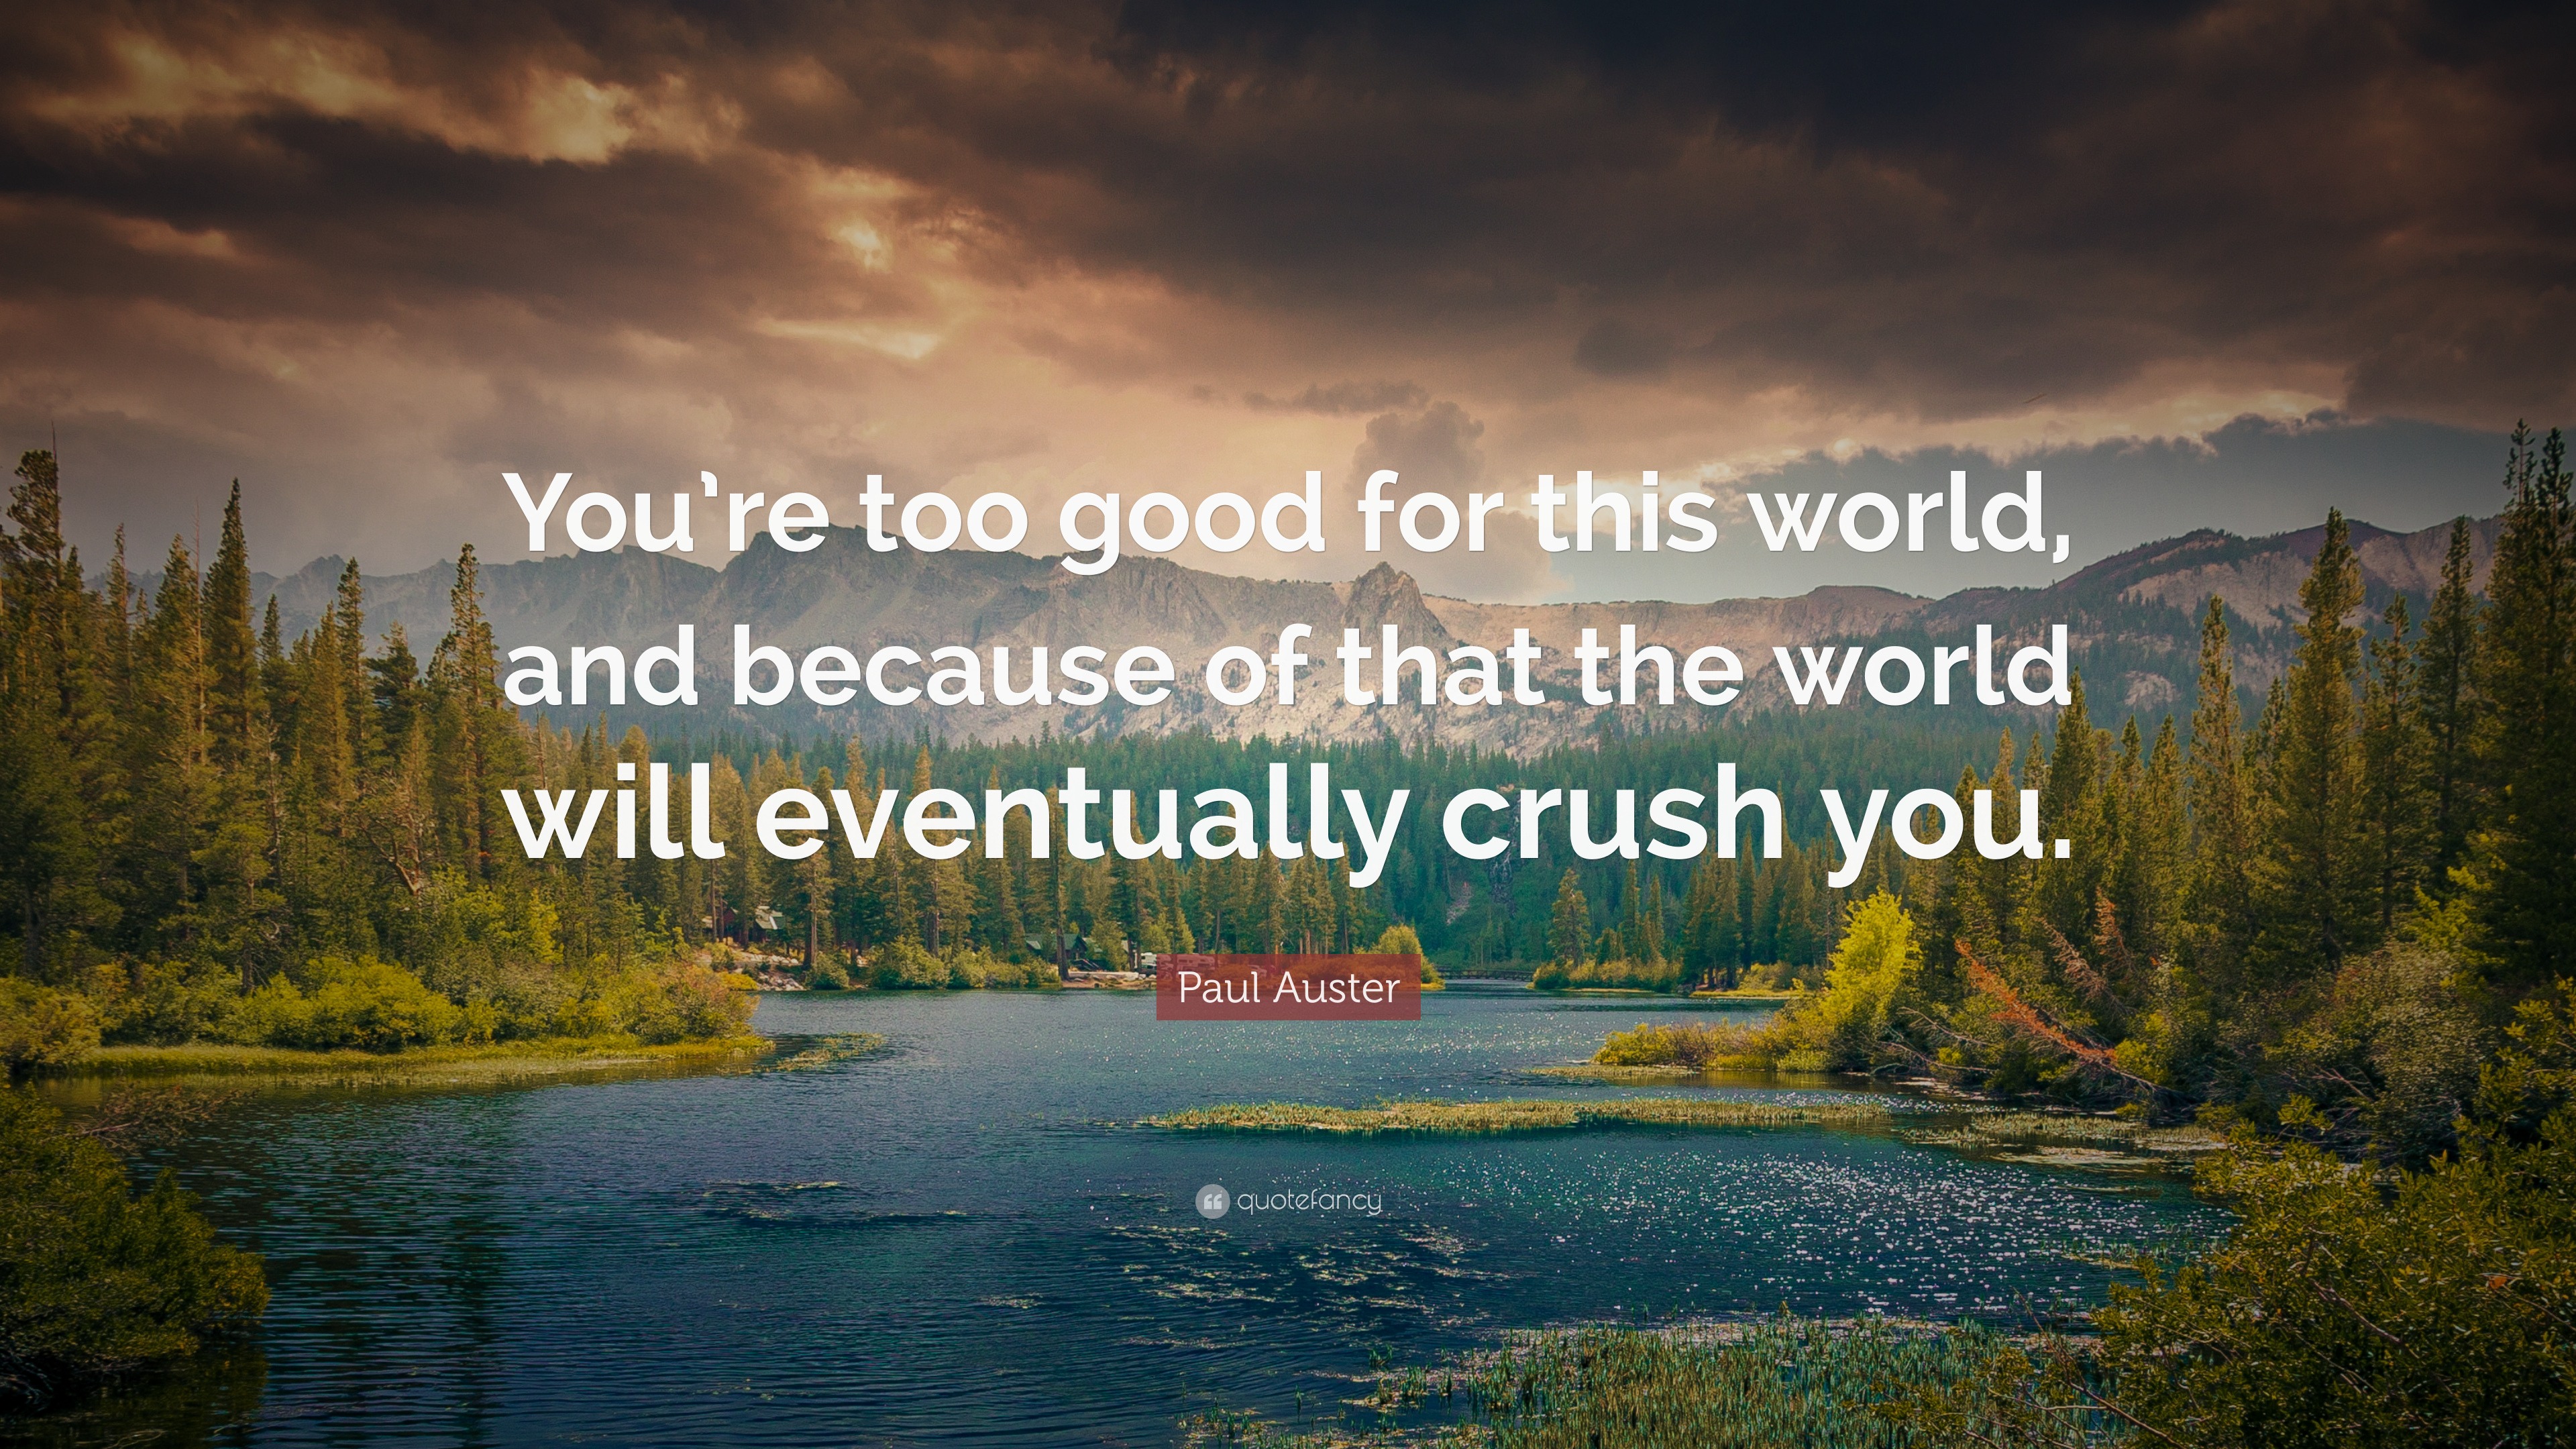 Paul Auster Quote: “You’re too good for this world, and because of that